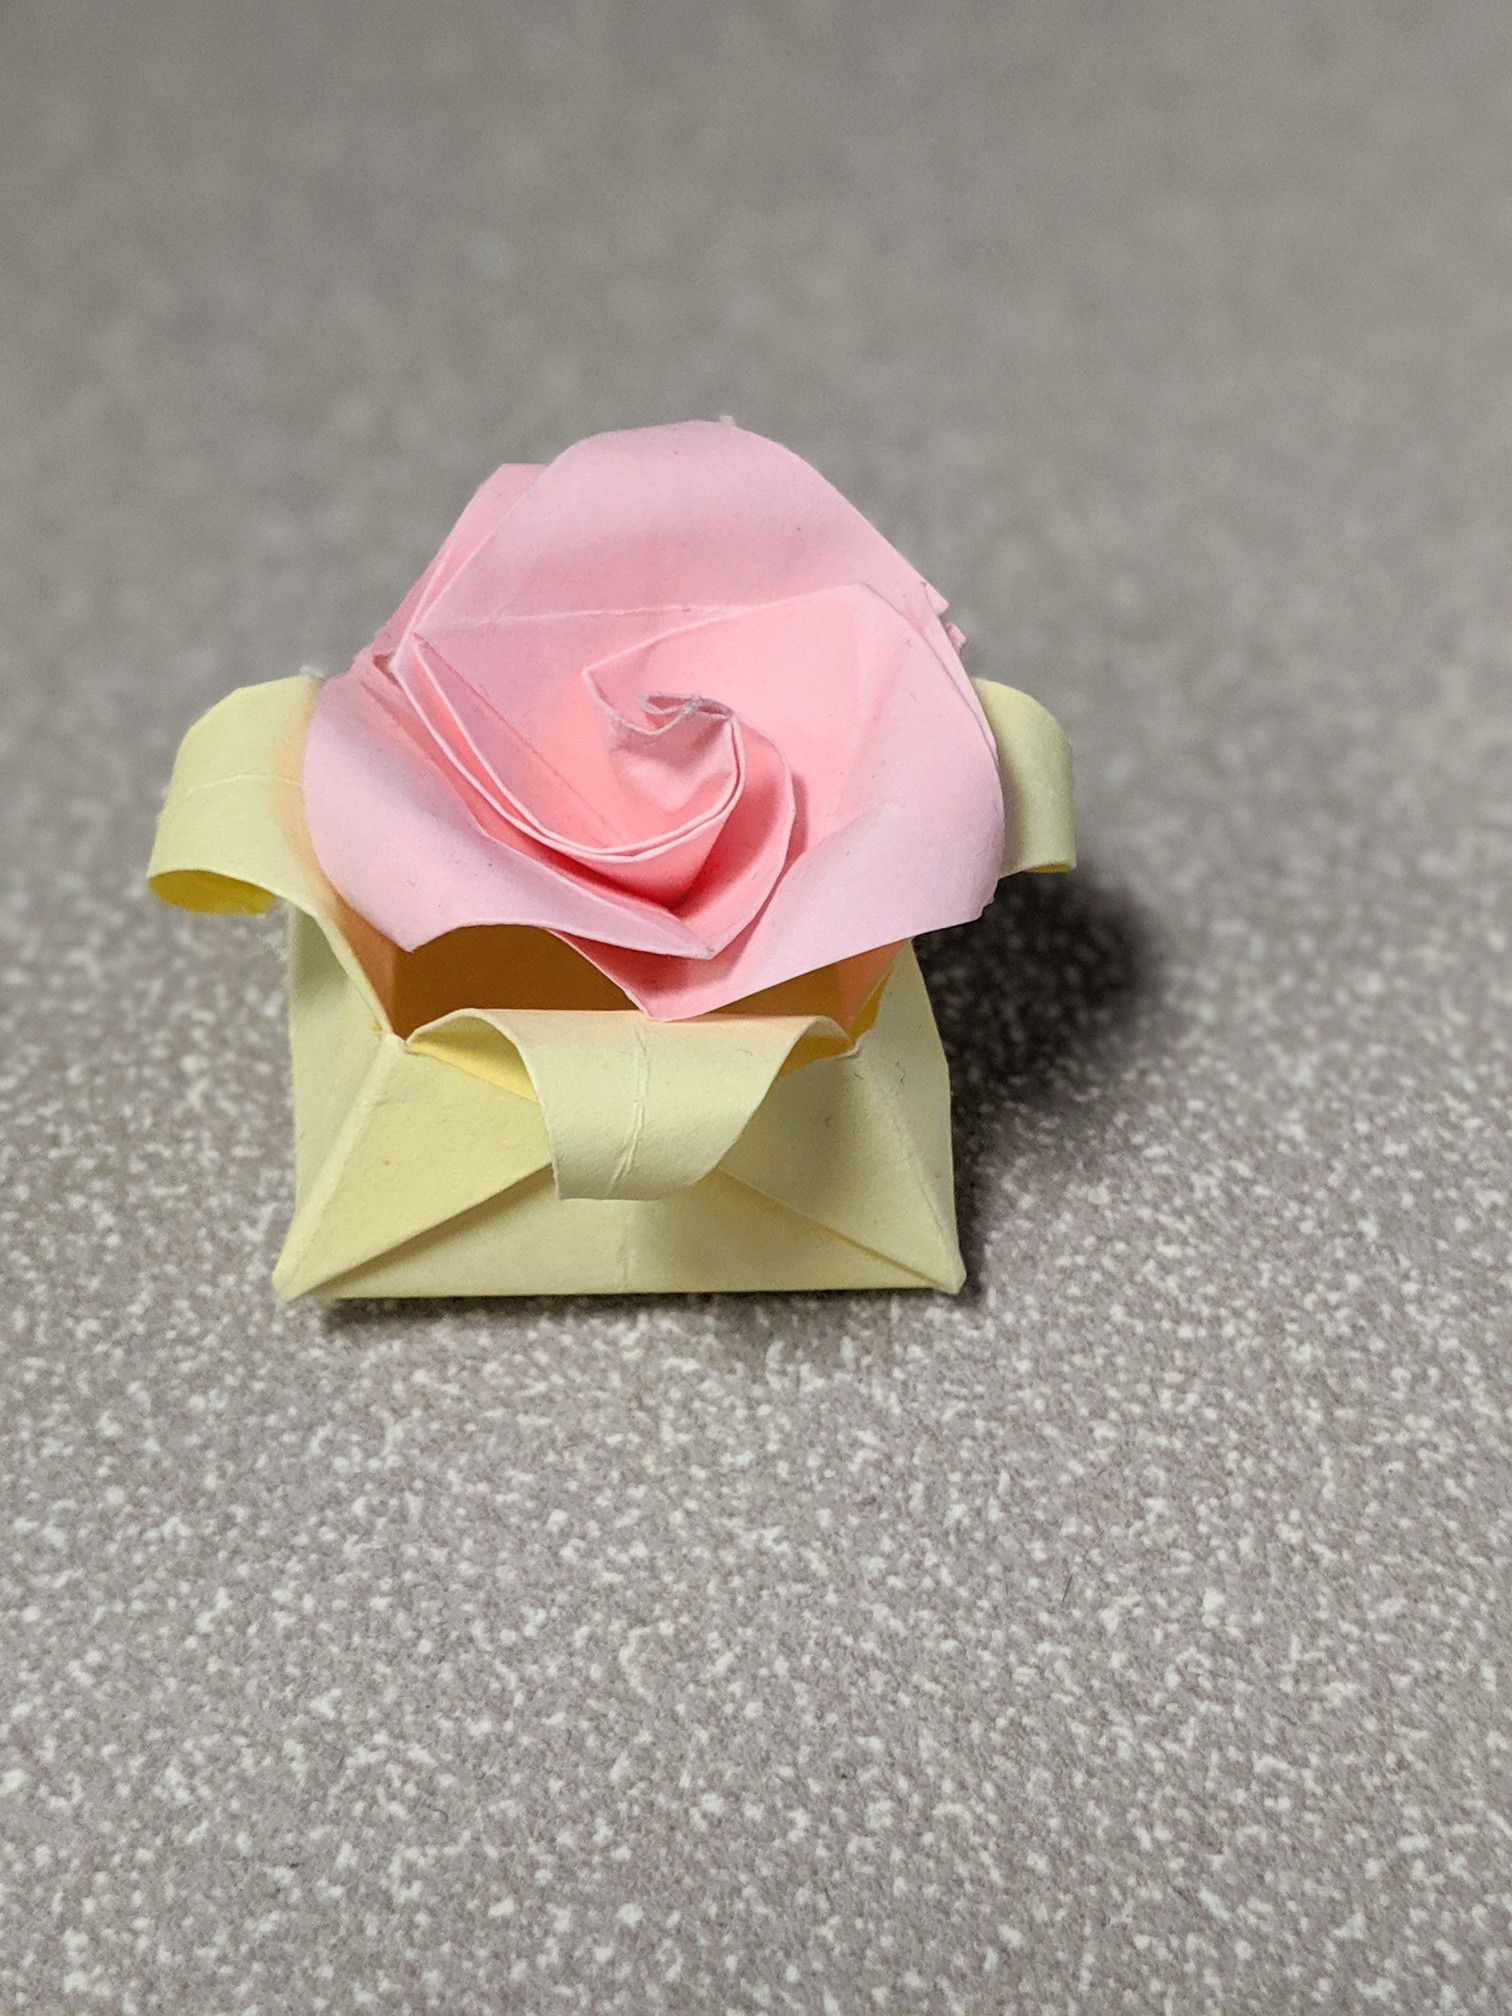 Origami for Gift/Decoration